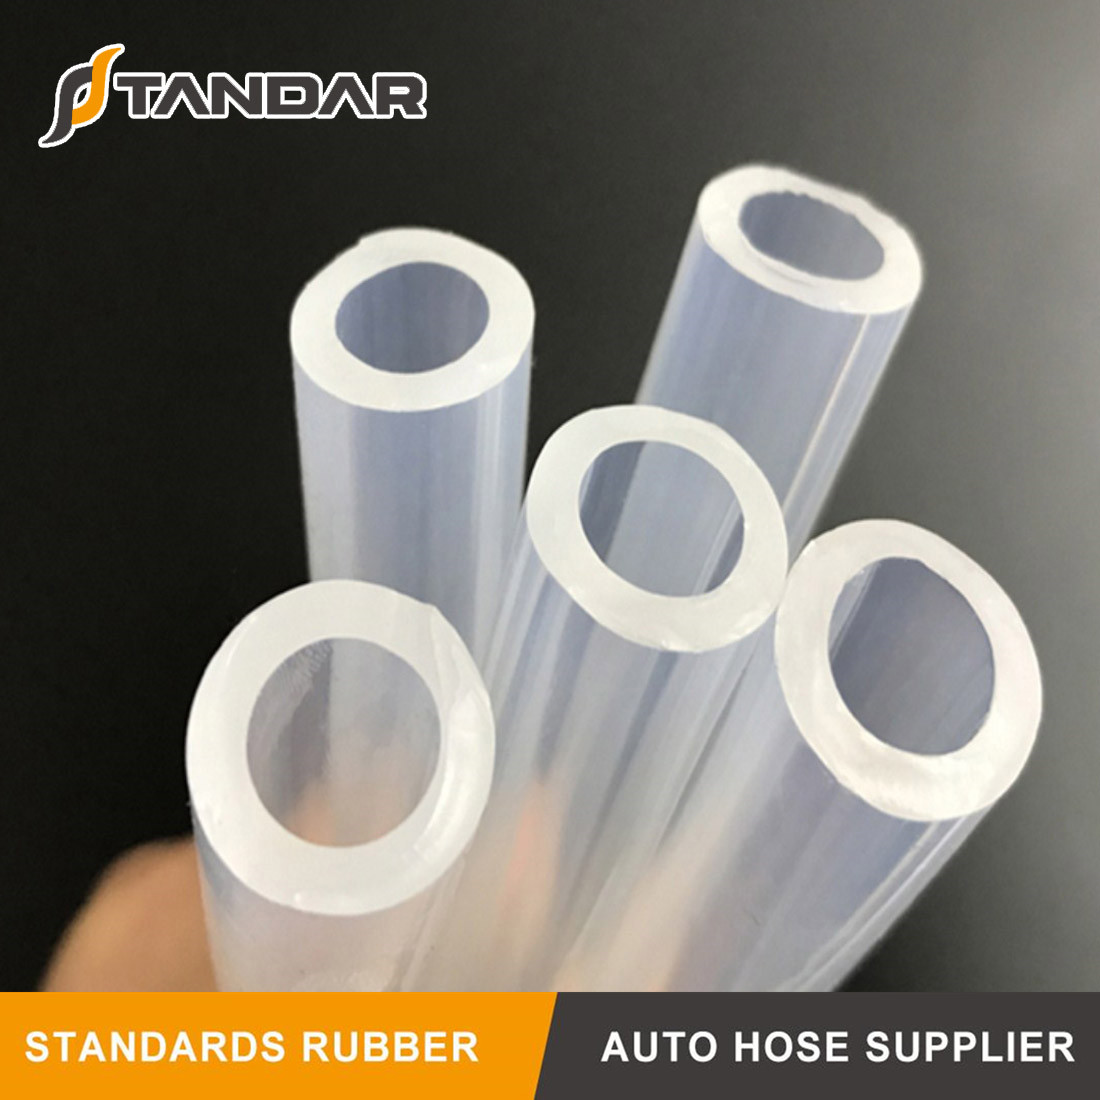 Where are high-quality silicone hoses used?